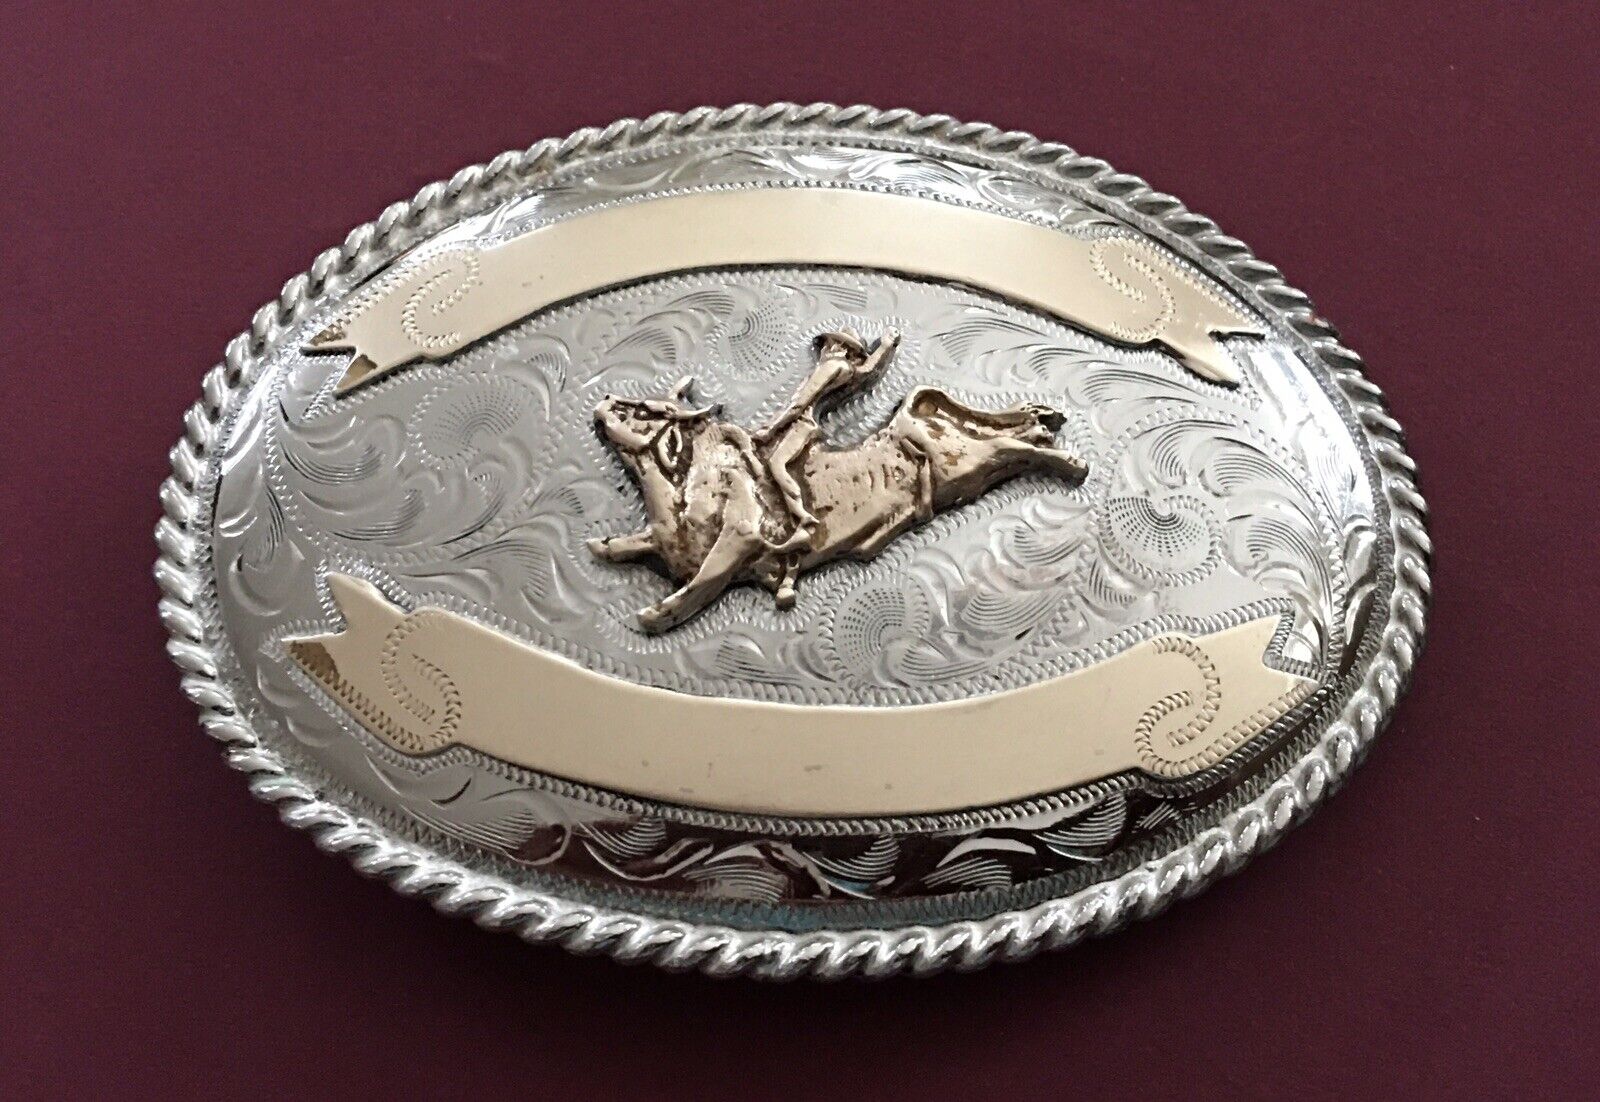 Awesome Old Vintage Western 2 Banner Silver Tone Bull Rider Trophy Belt Buckle